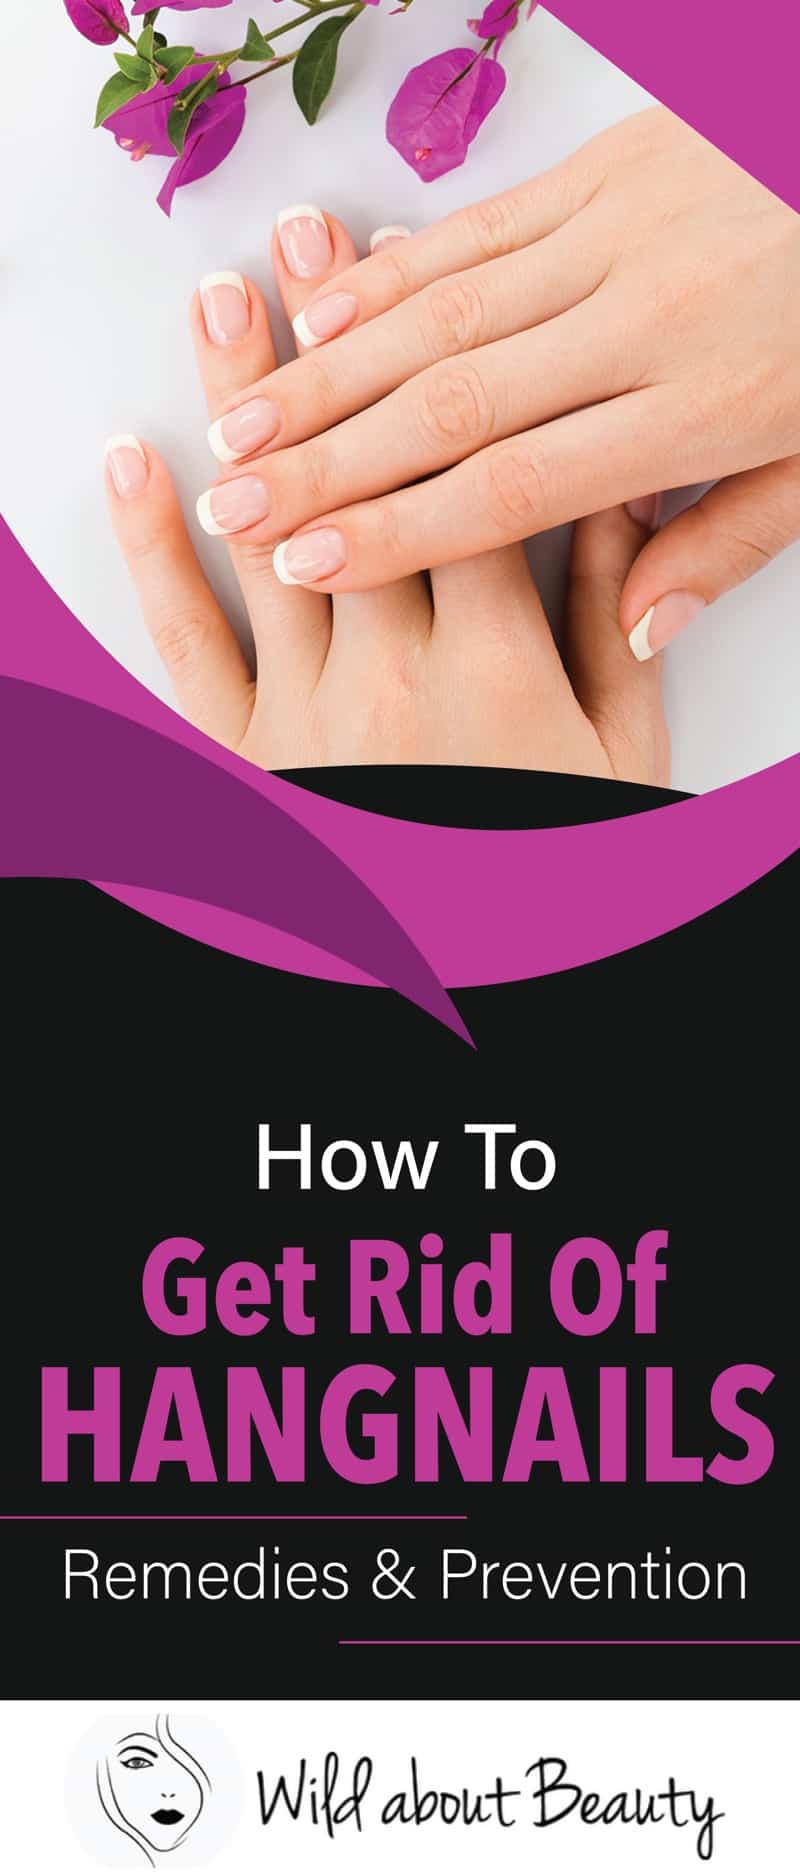 How To Get Rid Of Hangnails